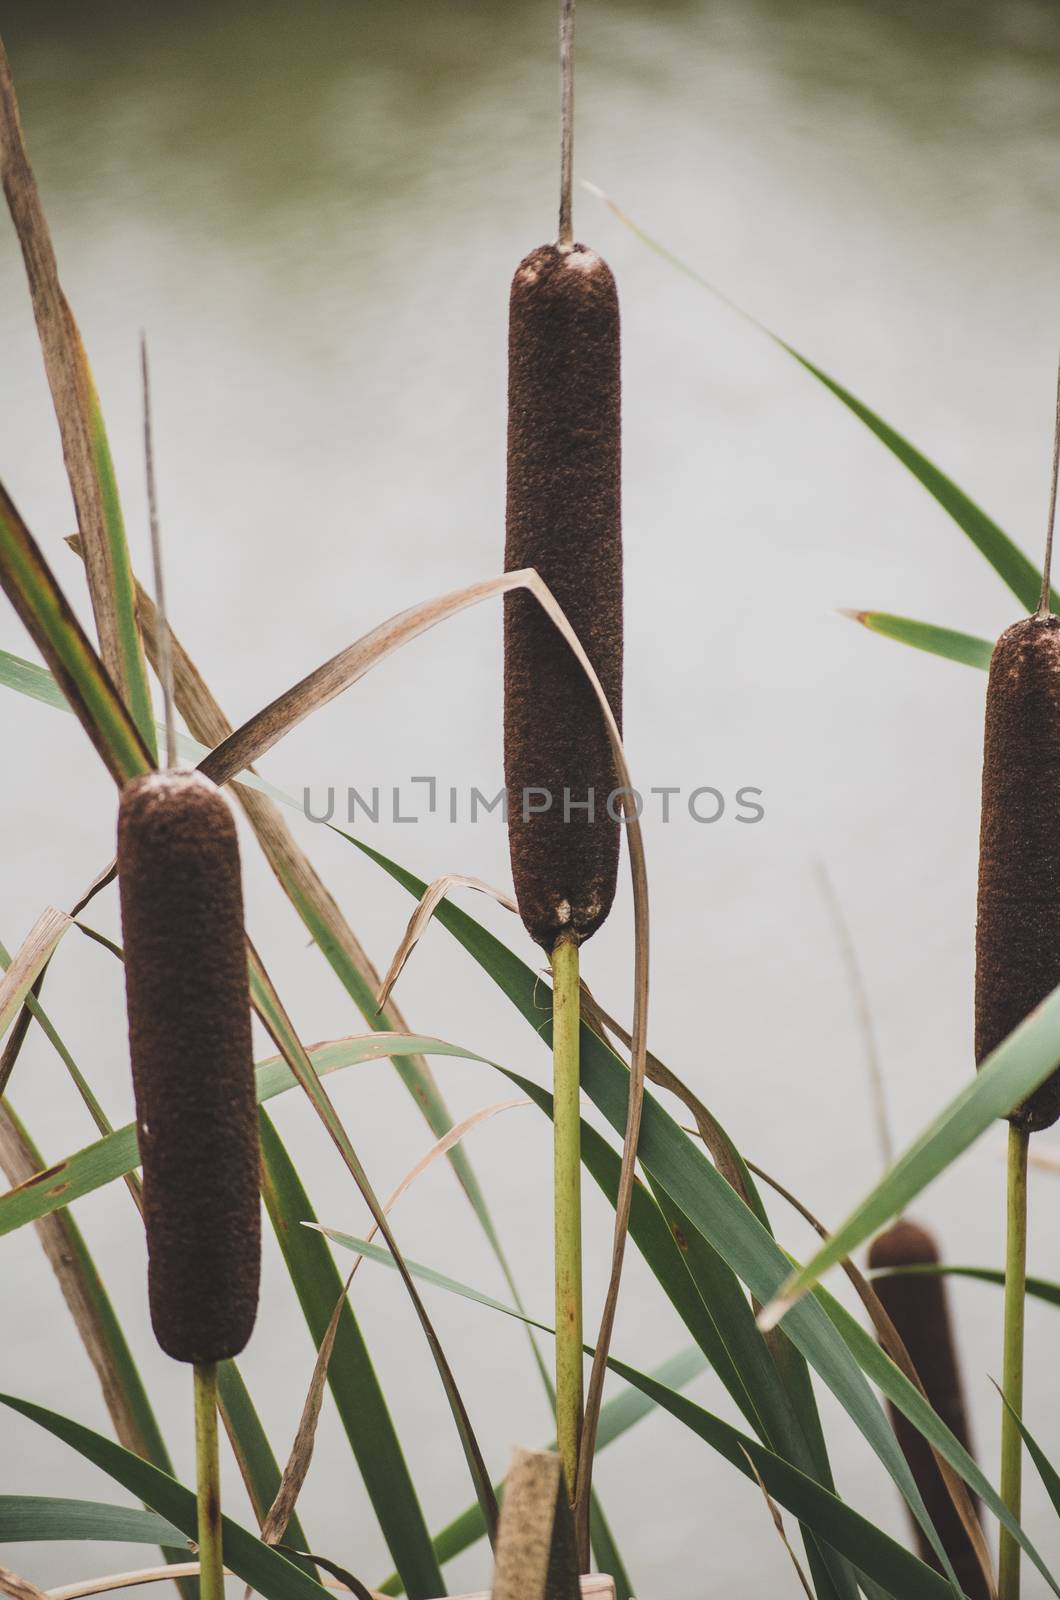 Three cattail reed plants near the water